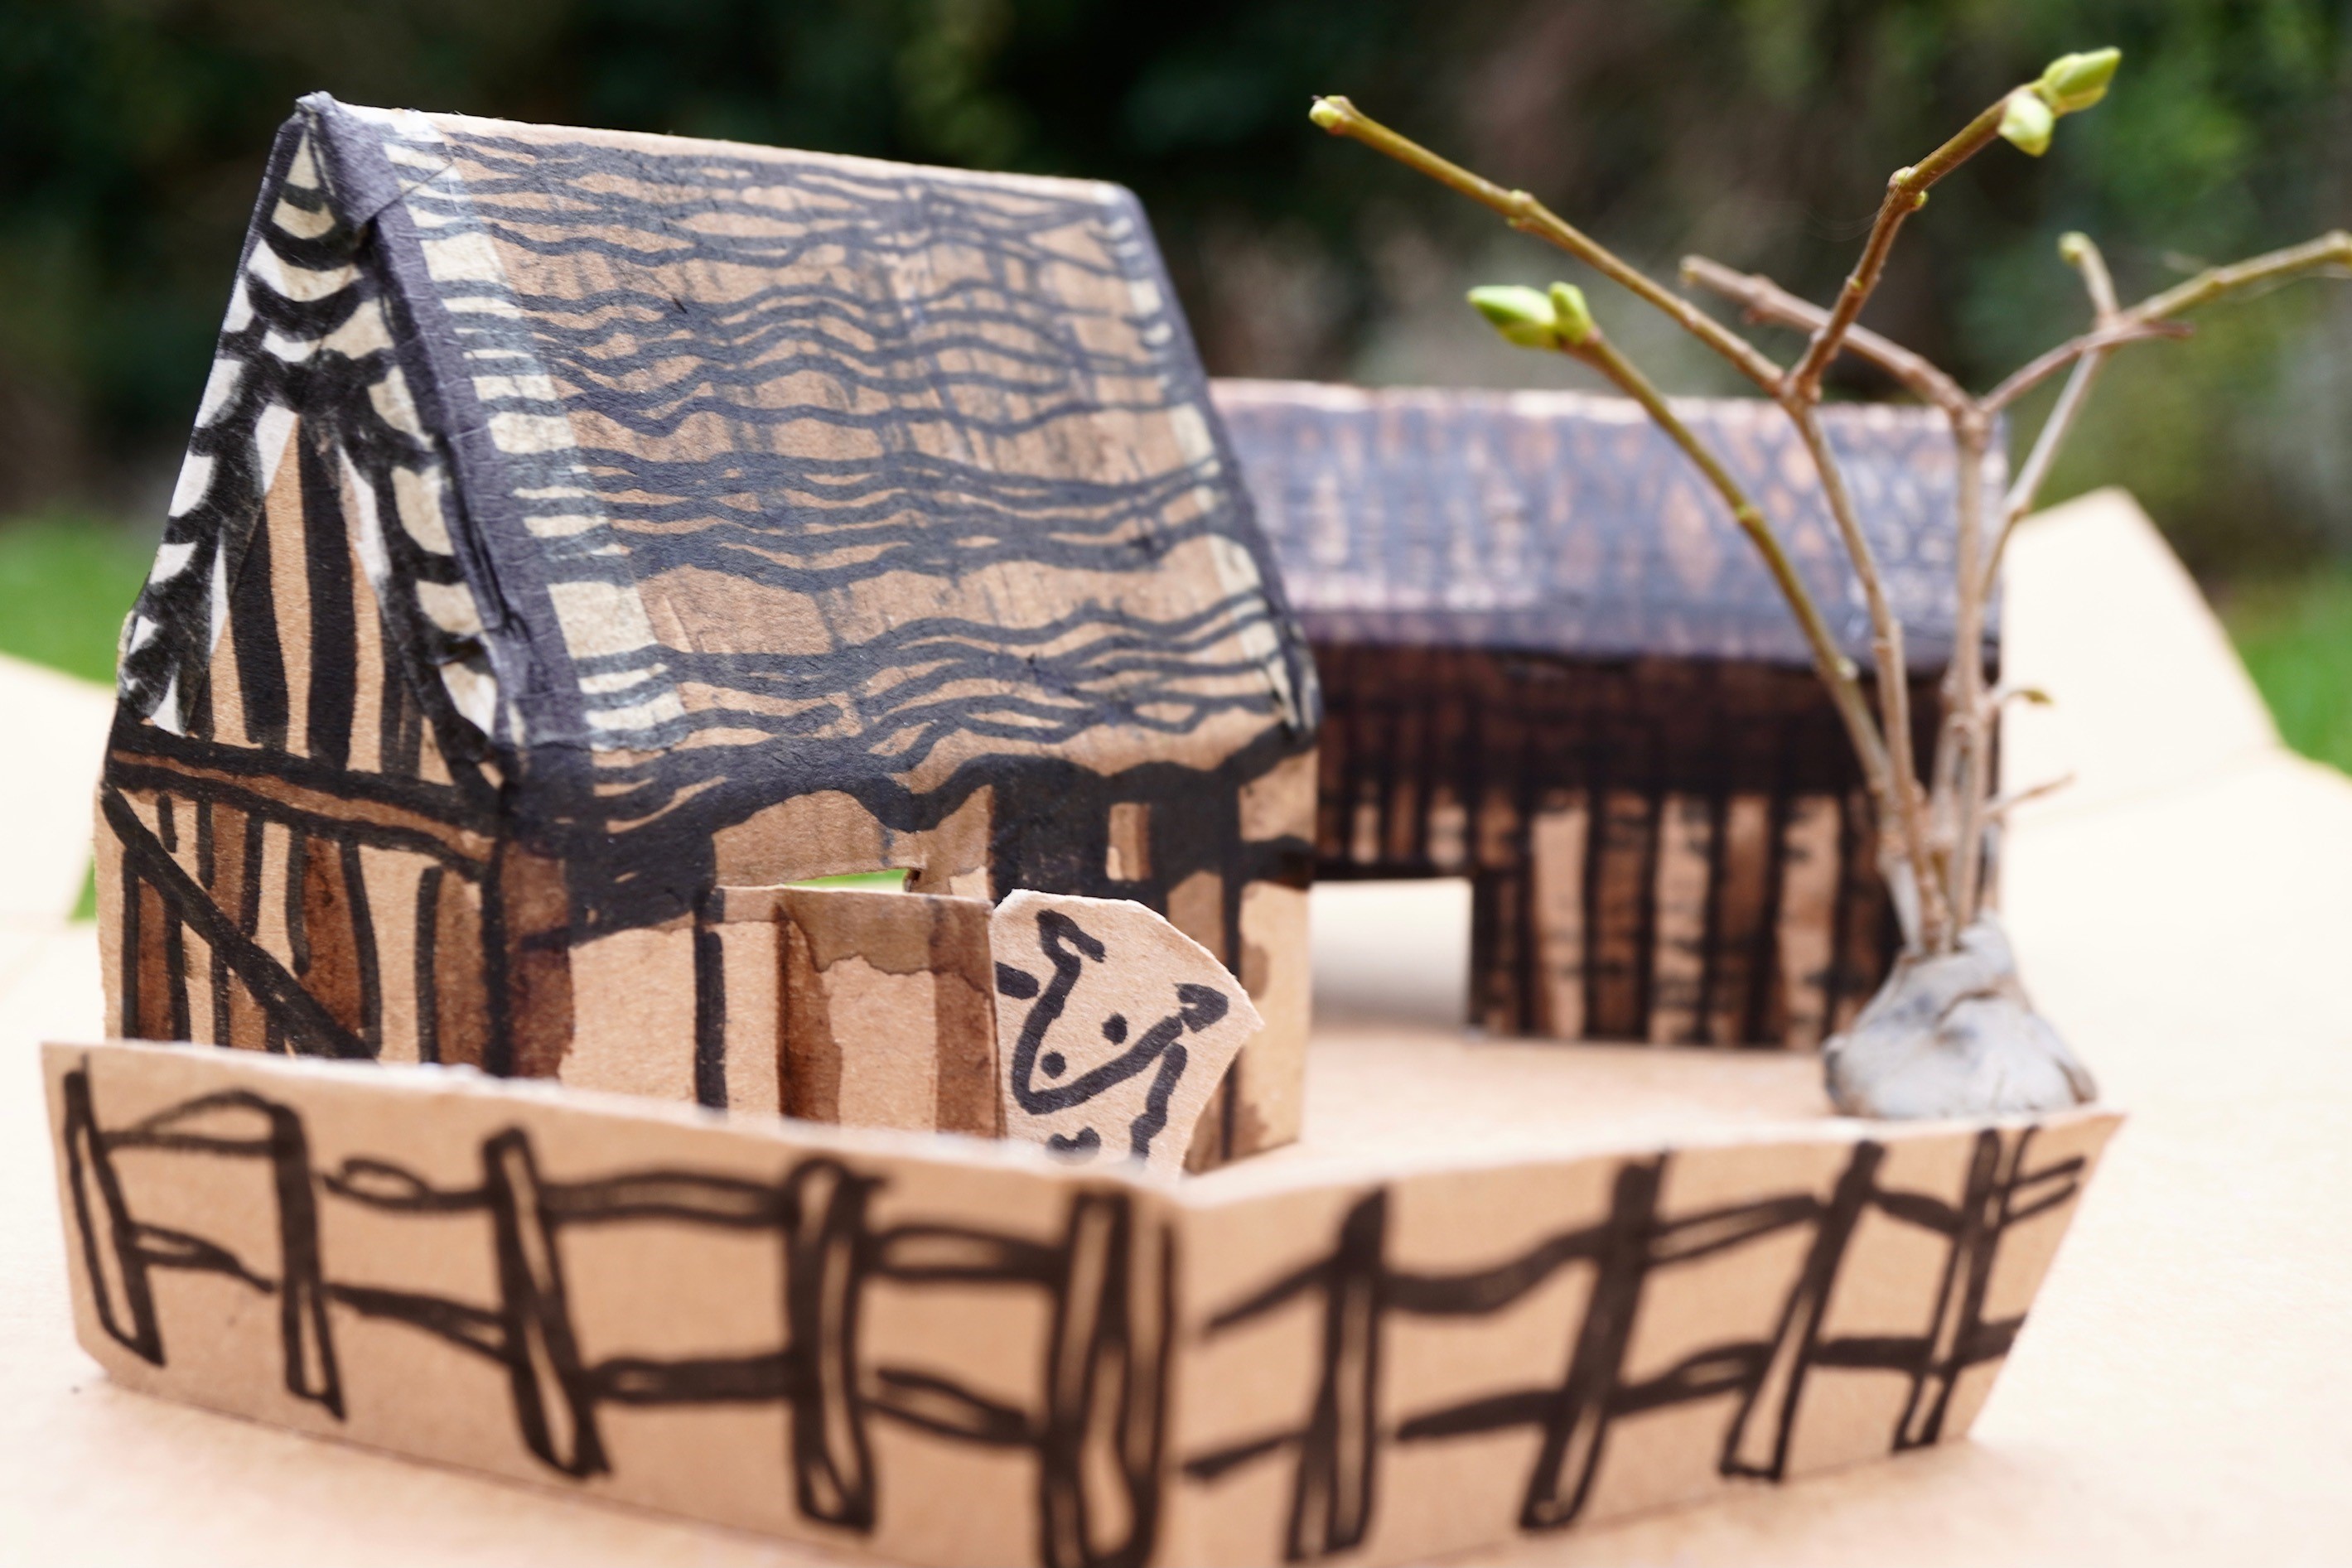 Anglo-Saxon themed crafts in the marquee – join them and make Anglo-Saxon houses out of recycled cardboard and natural materials including foraged inks!